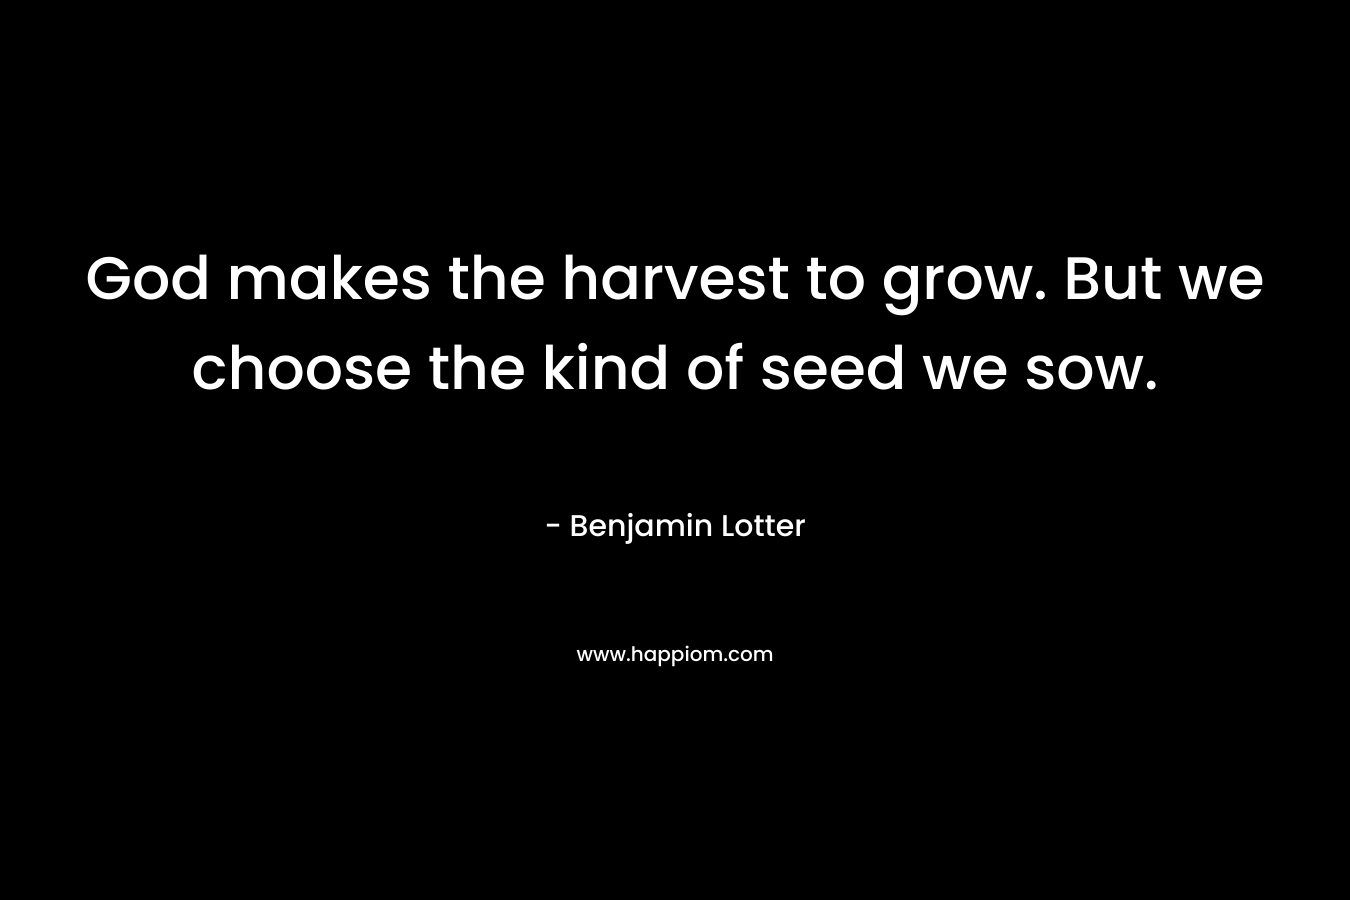 God makes the harvest to grow. But we choose the kind of seed we sow. – Benjamin Lotter